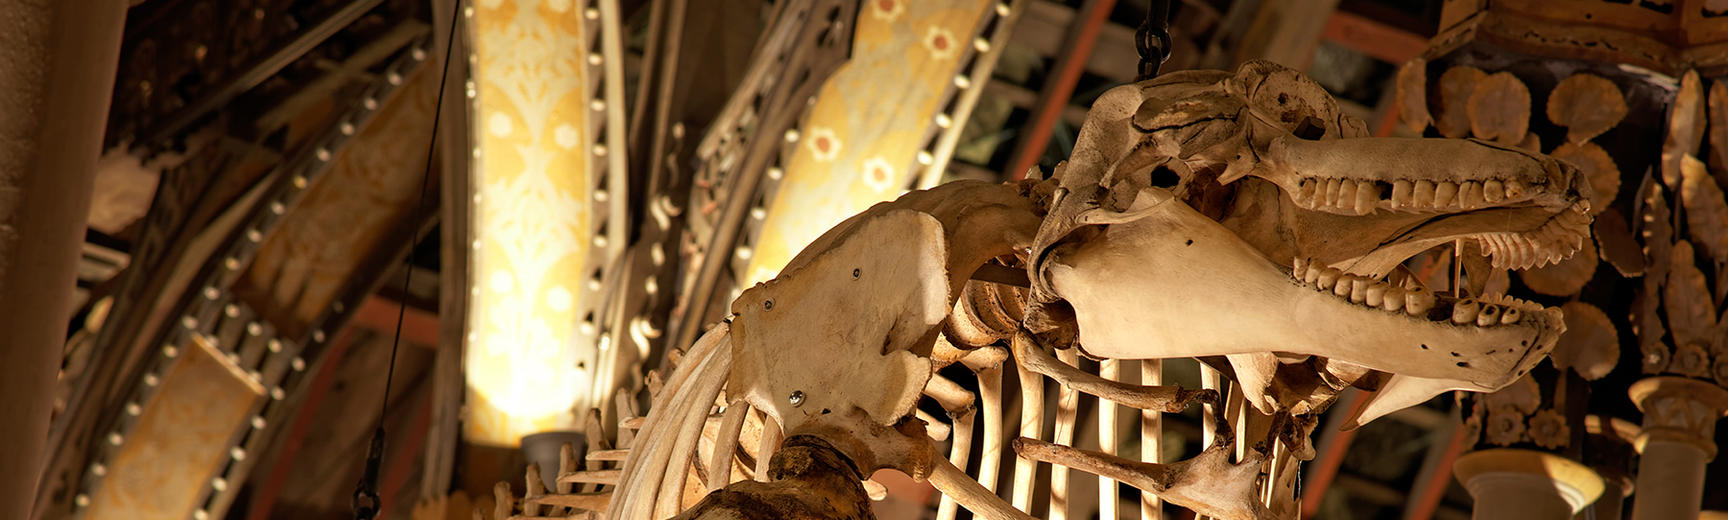 Orca skeleton from the roof at Oxford University Museum of Natural History